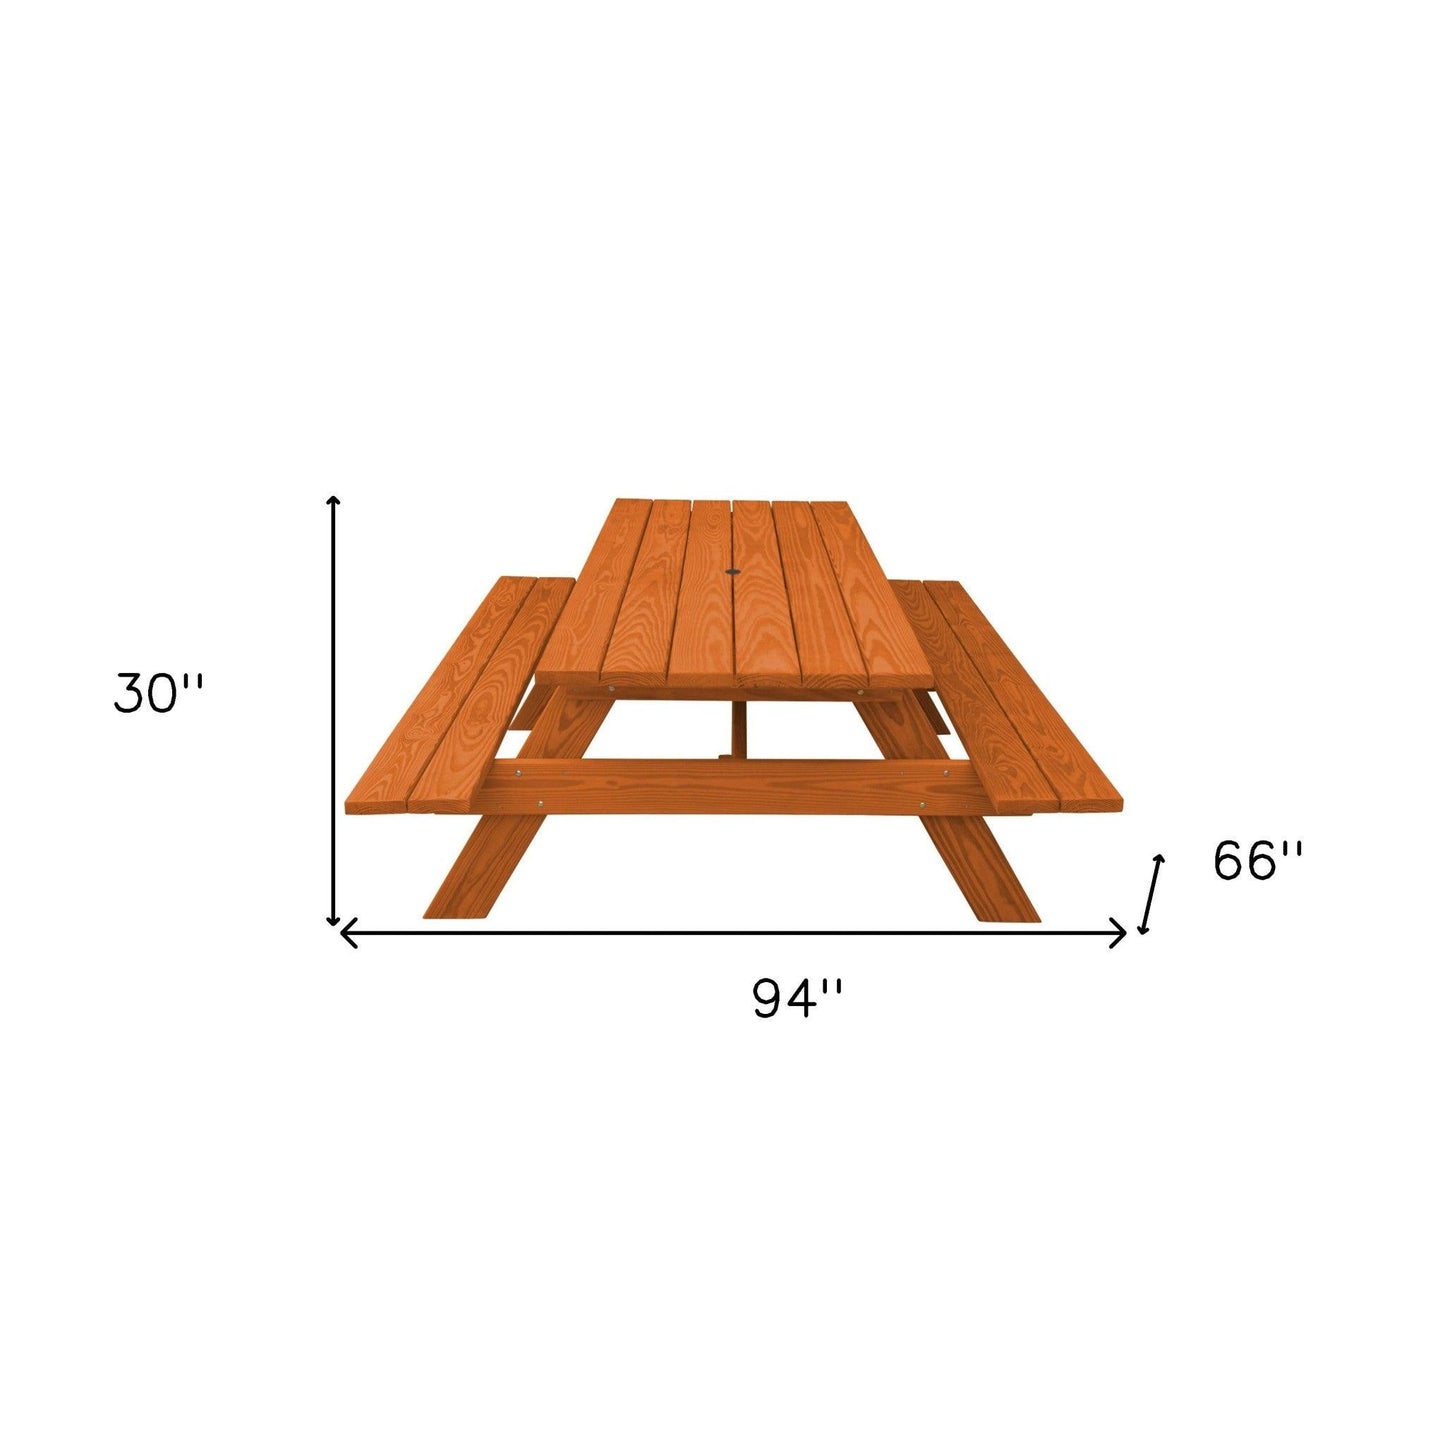 94" Redwood Solid Wood Outdoor Picnic Table with Umbrella Hole - FurniFindUSA